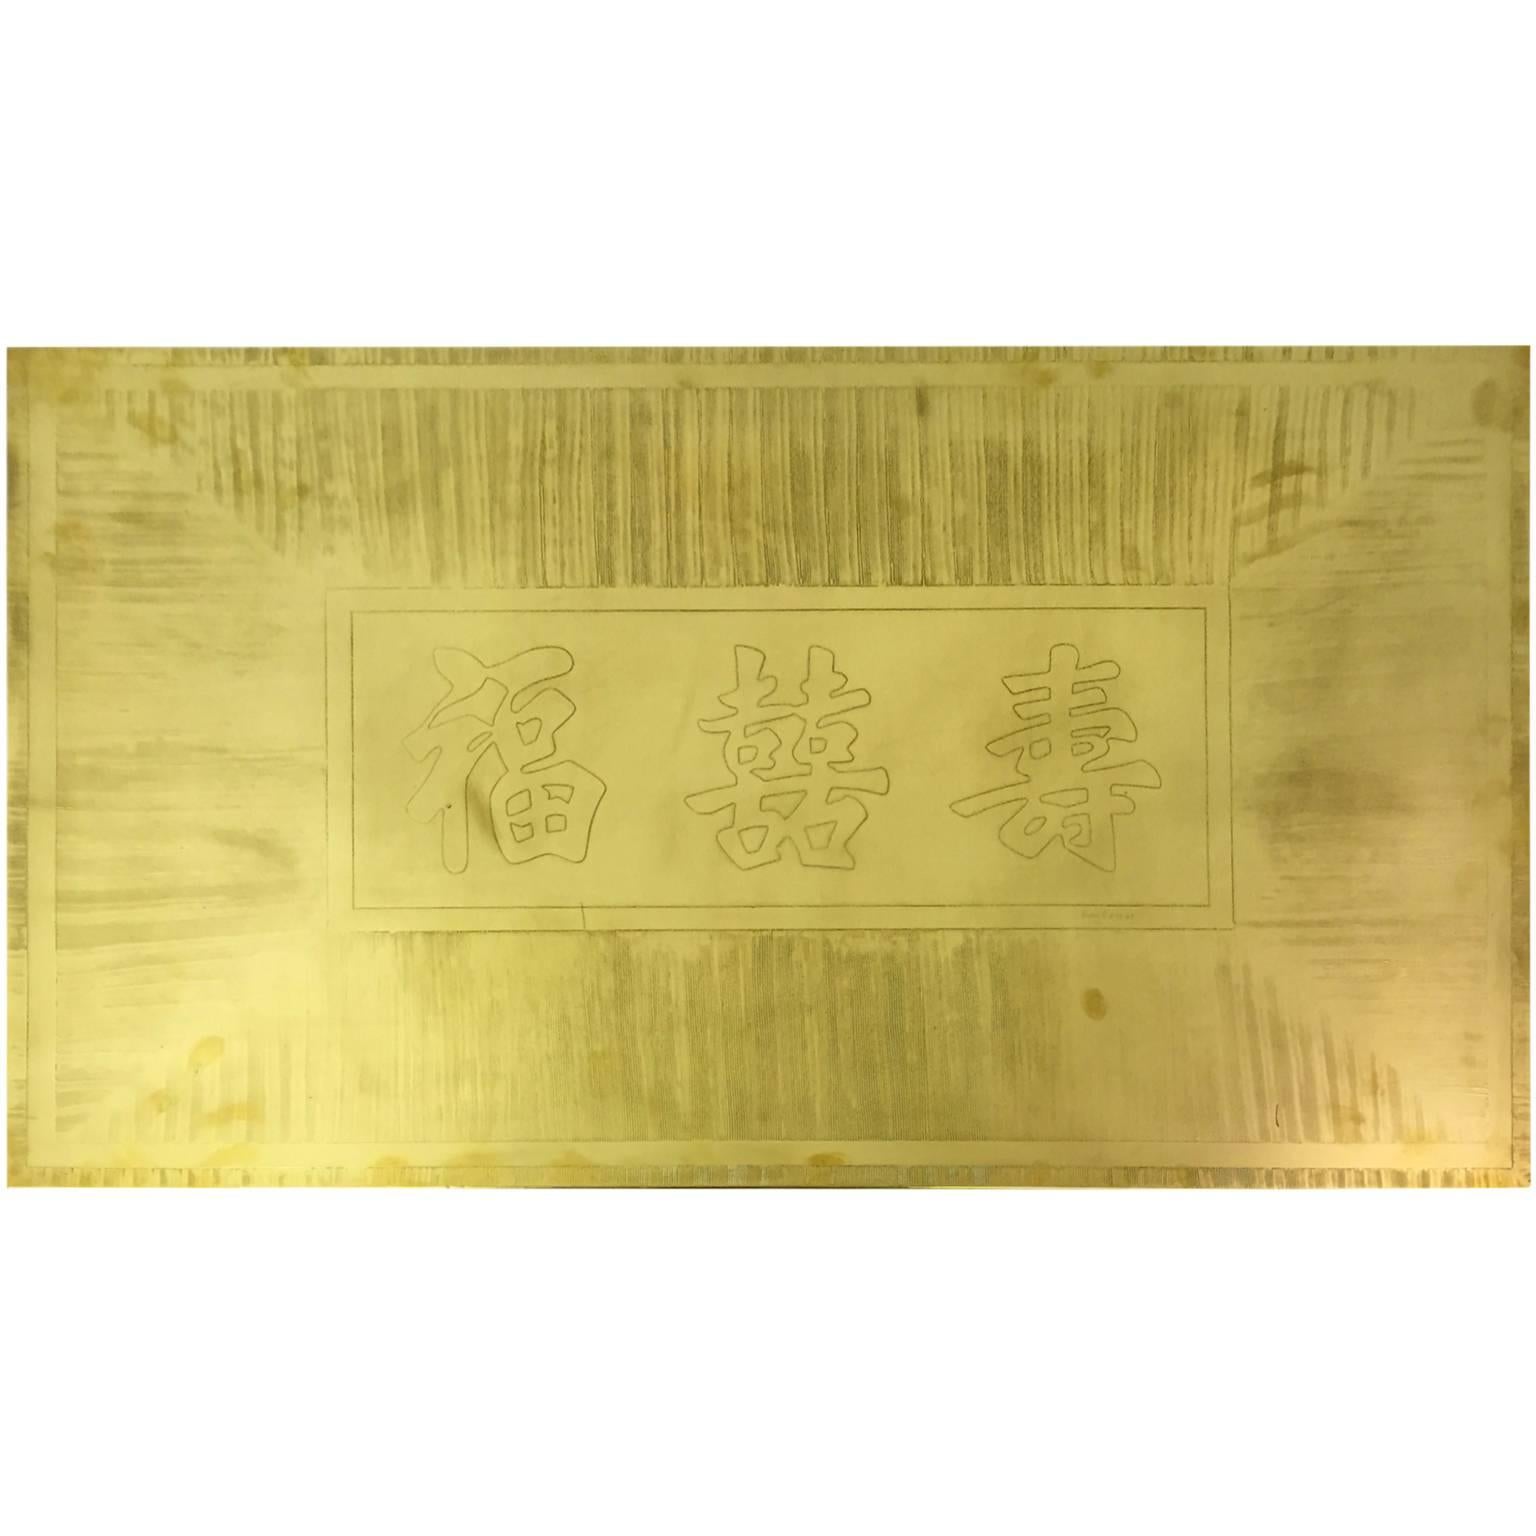 Etched brass coffee table with Chinese symbol design, signed "Ricco". Belgium, 1970's. 